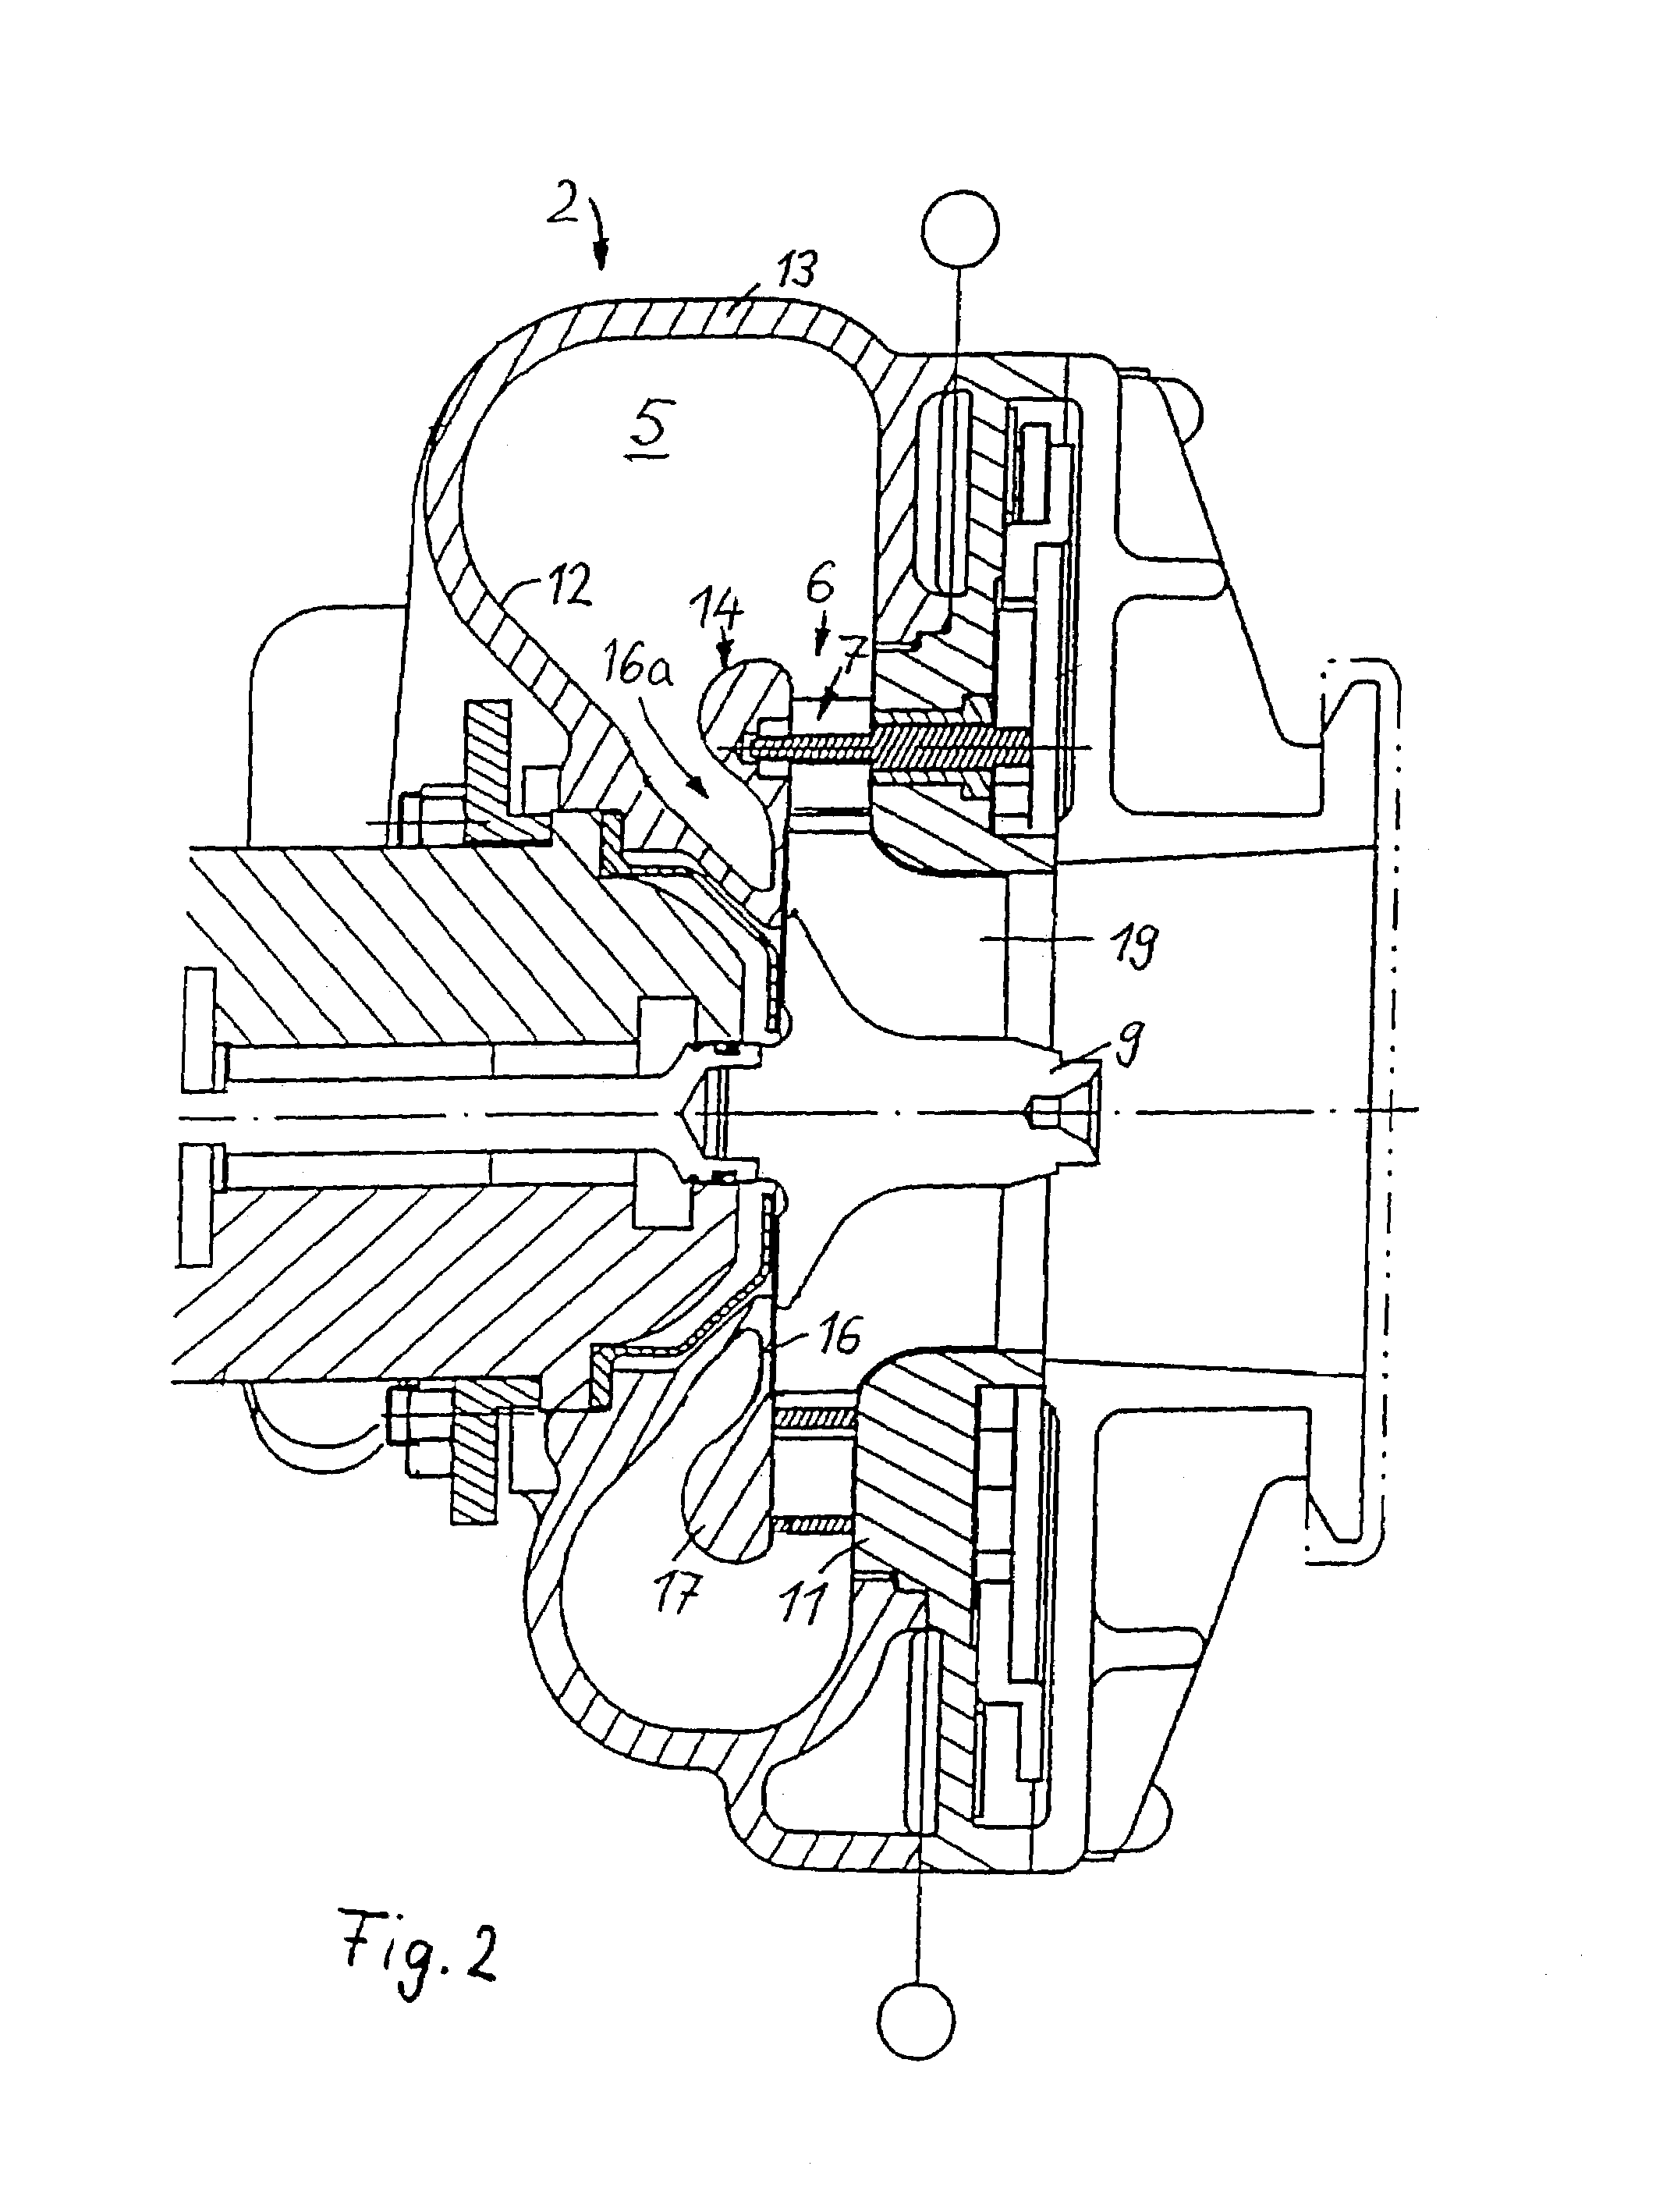 Exhaust-gas turbocharger for an internal combustion engine with variable turbine geometry